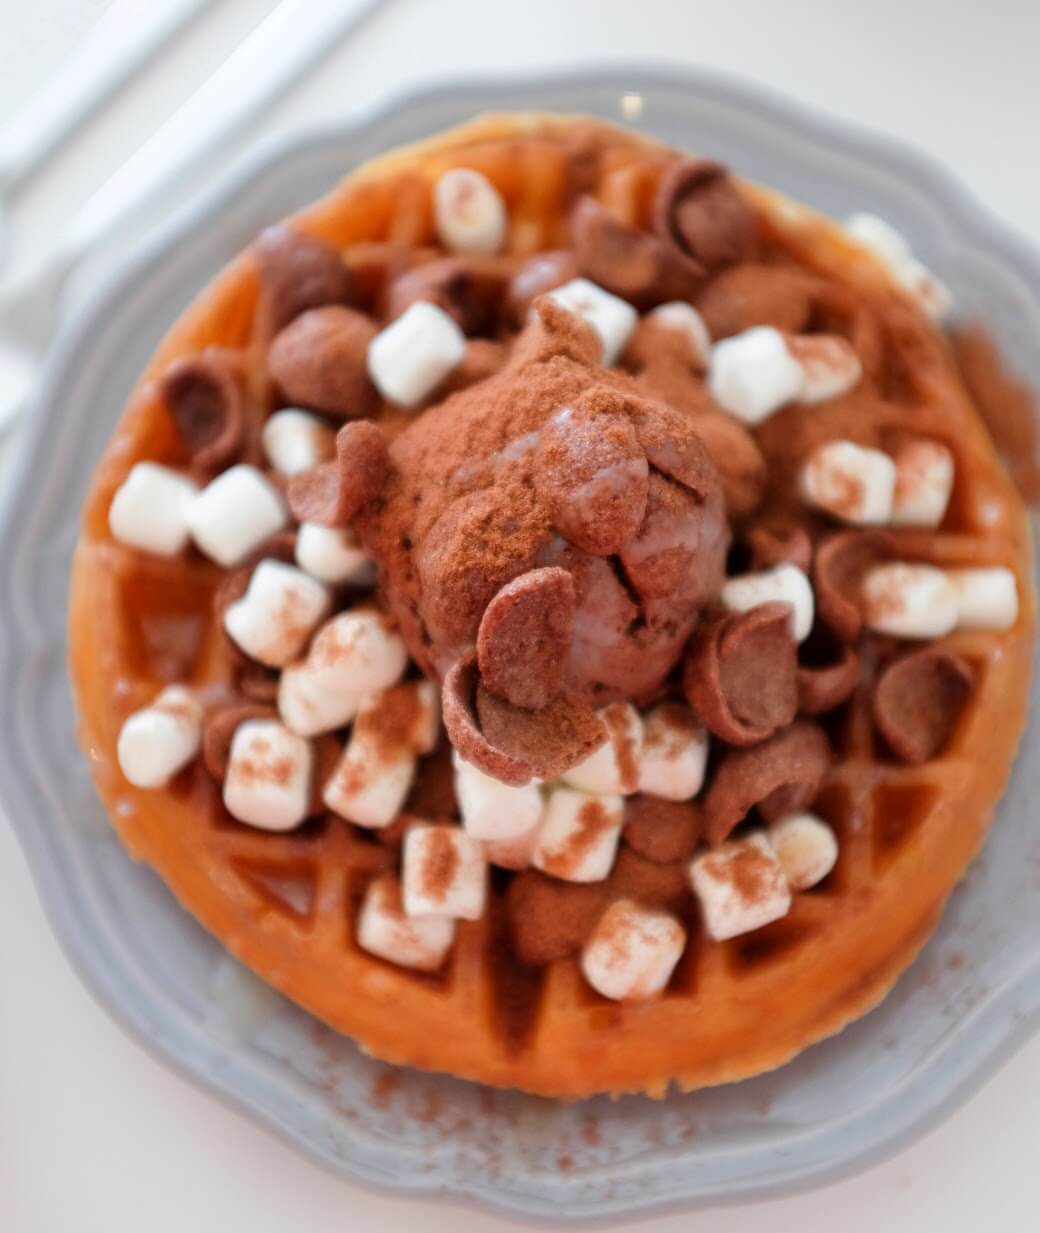 Try a waffle topped with Milo powder, marshmallows, coco crunch and dark chocolate ice cream! The Milo Dinosaur waffle will surely amaze you with its sweet yet delicate touch at The Owl’s Cafe, Sunway Pyramid Mall